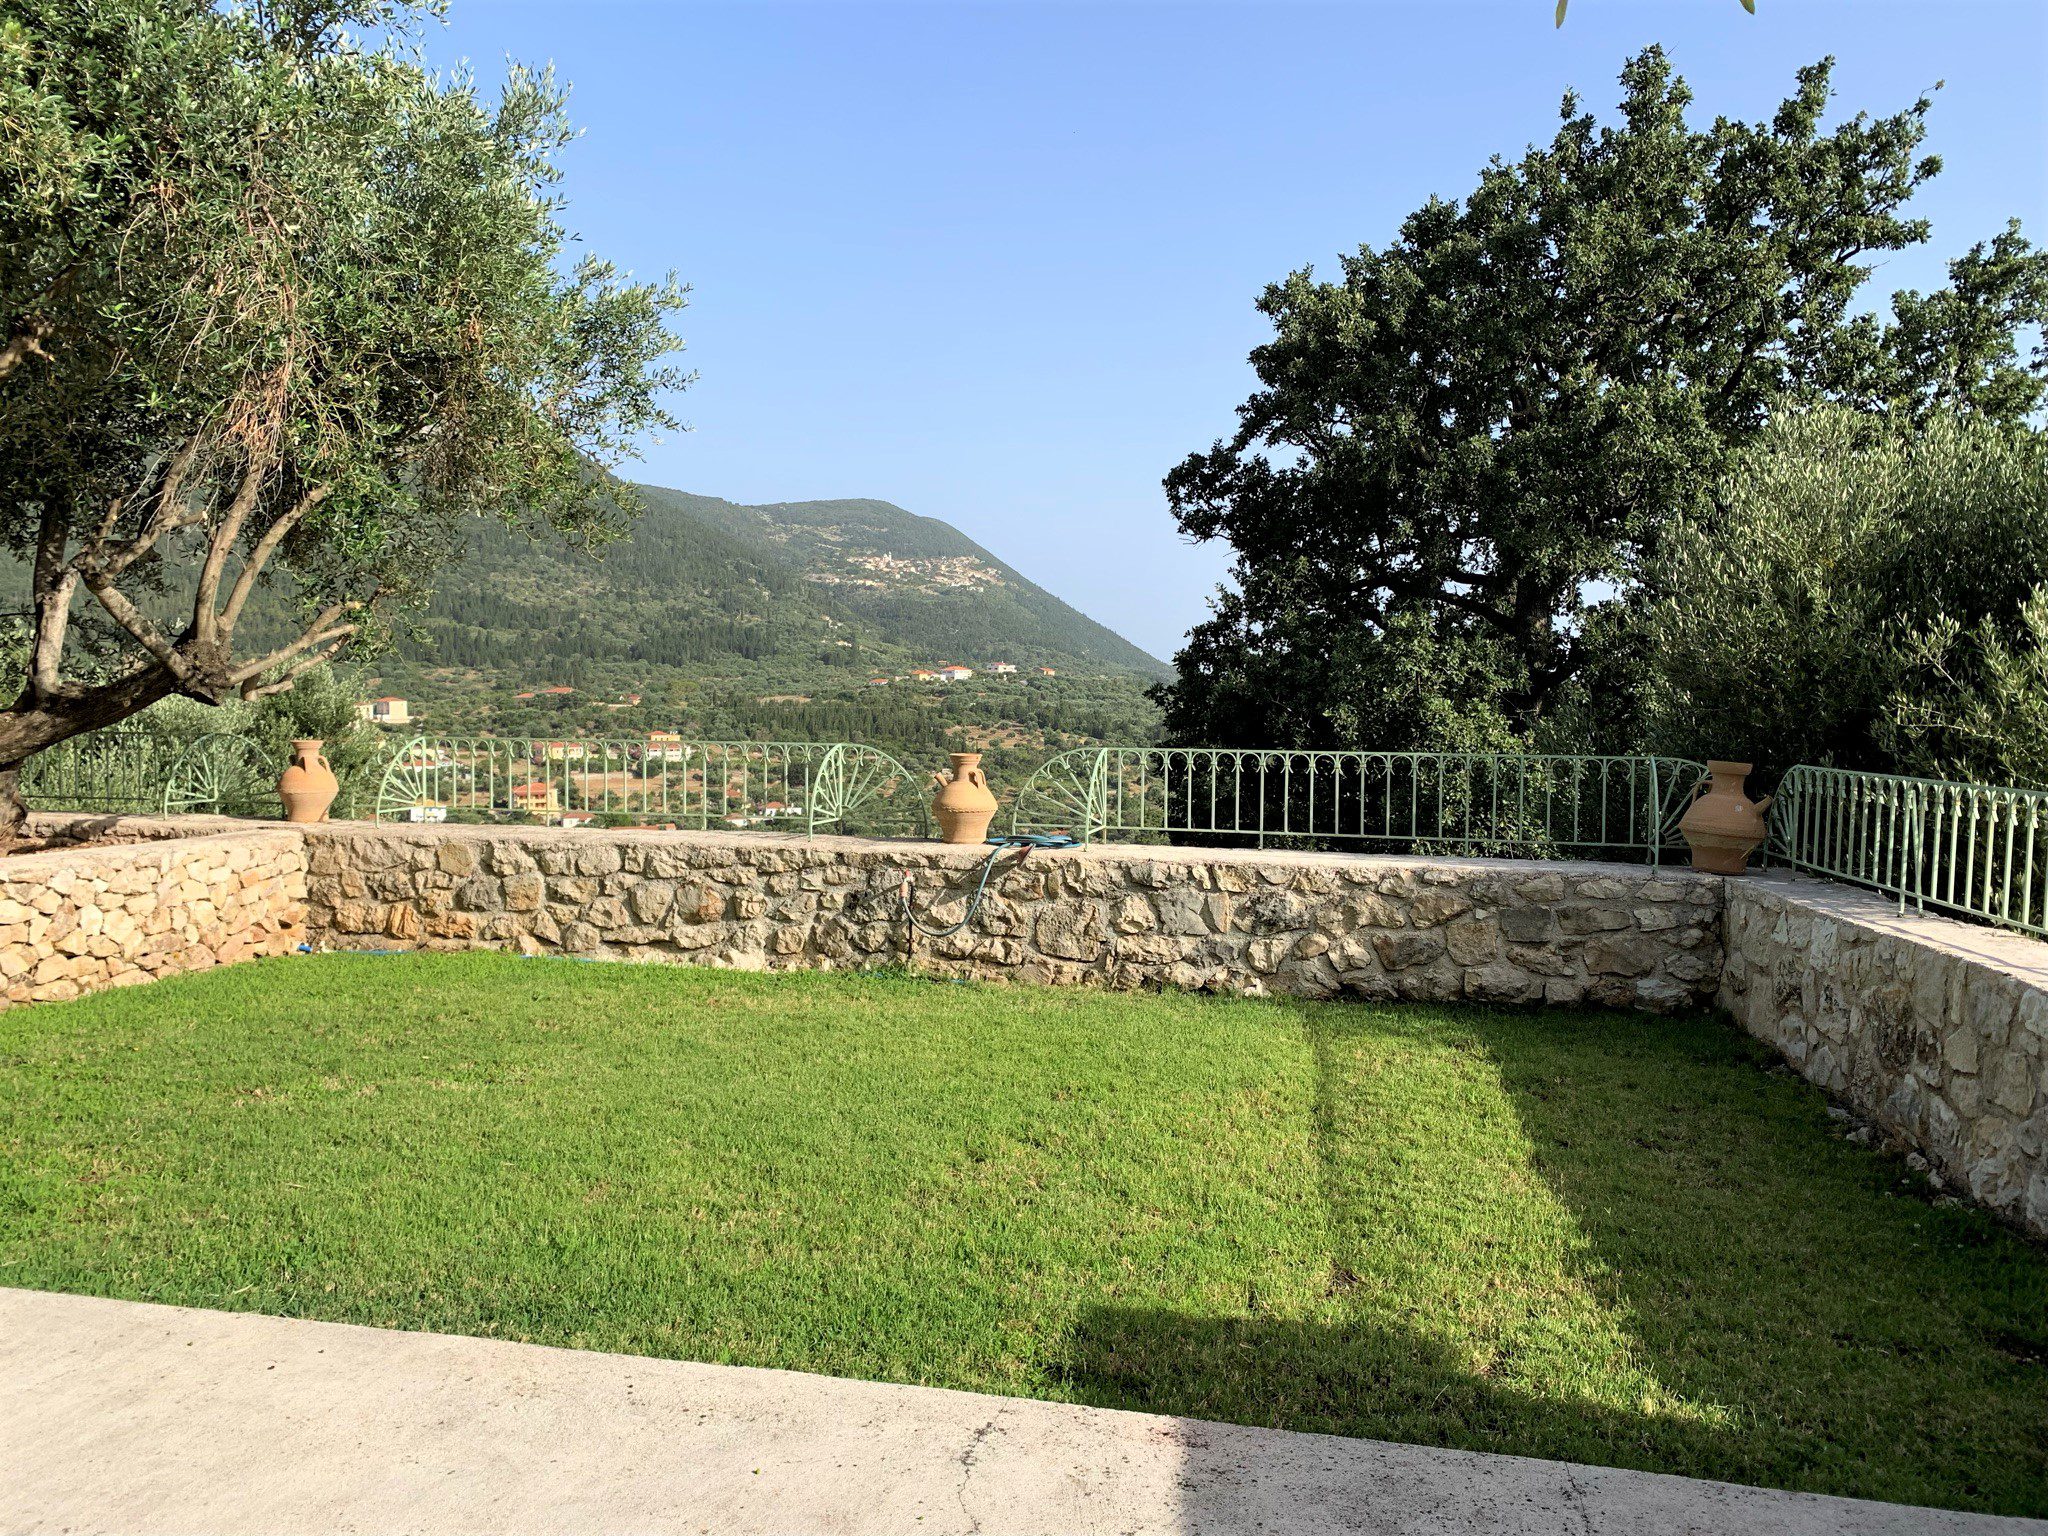 Front garden of holiday houses for rent on Ithaca Greece, Stavros